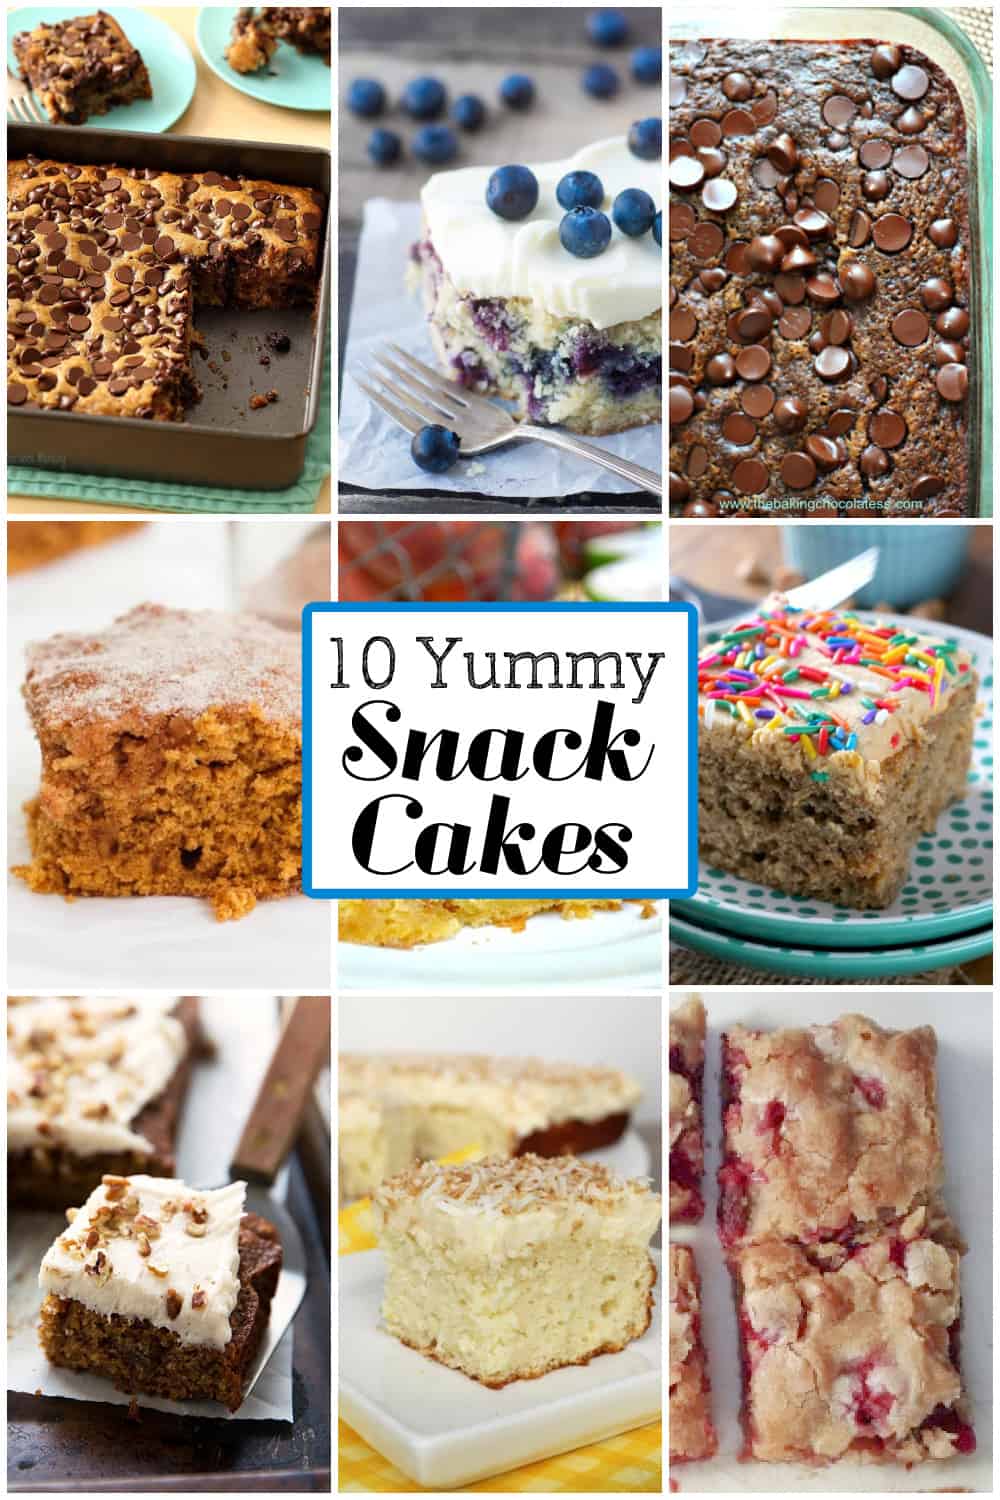 10 Yummy Snack Cakes To Try